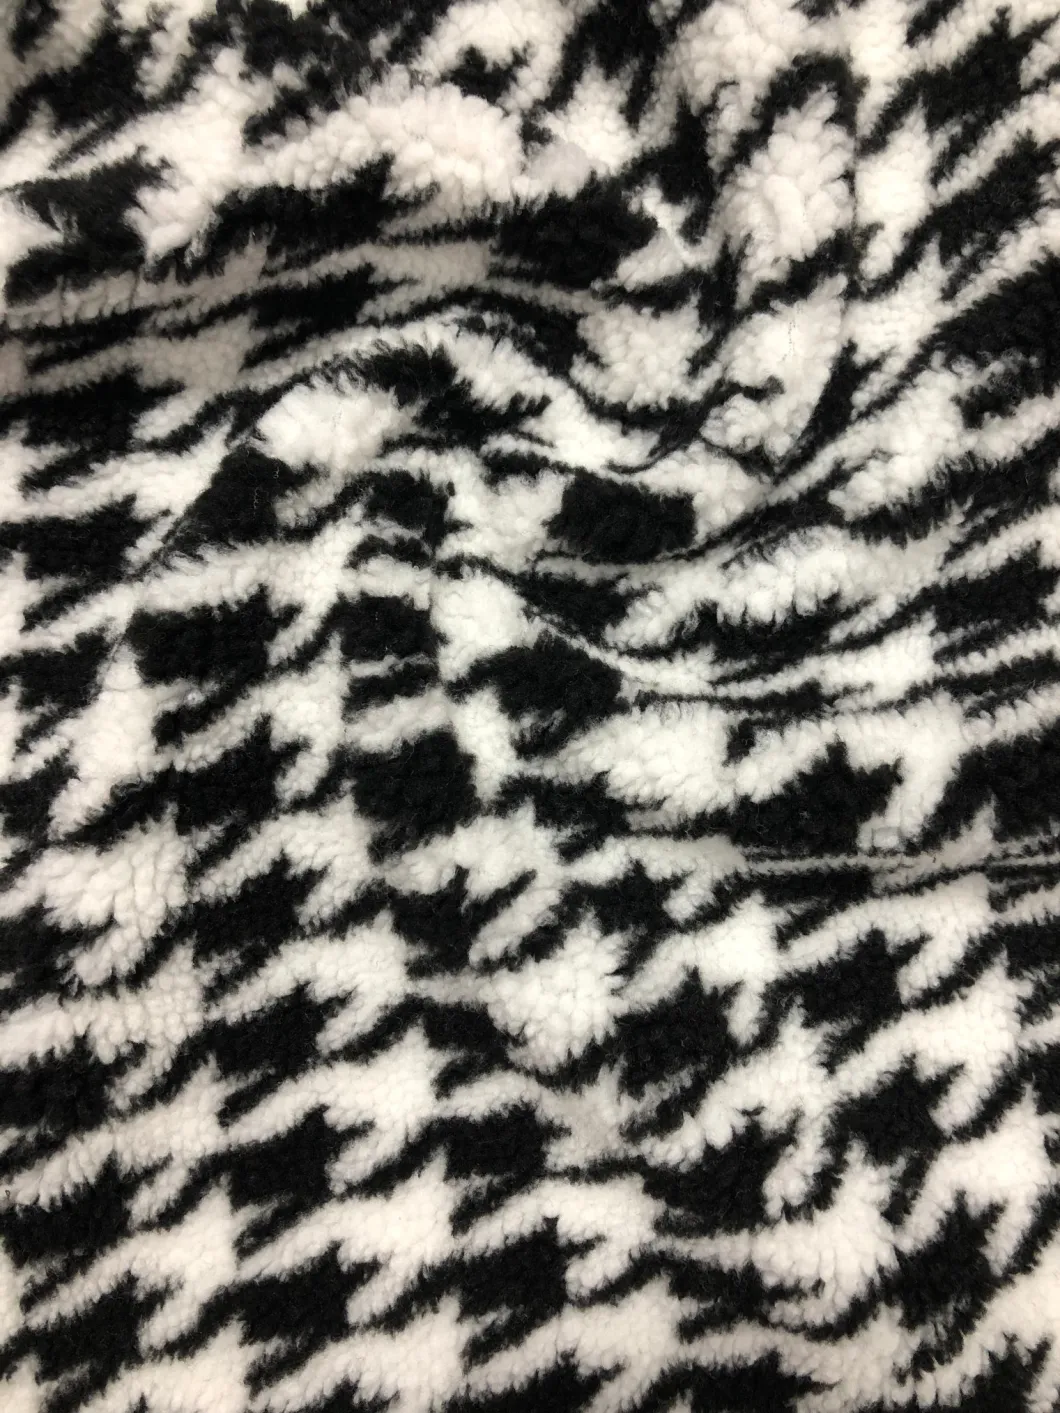 100%Polyester Lambswool Jacquard Knitted Fabric (Berber Fleece)